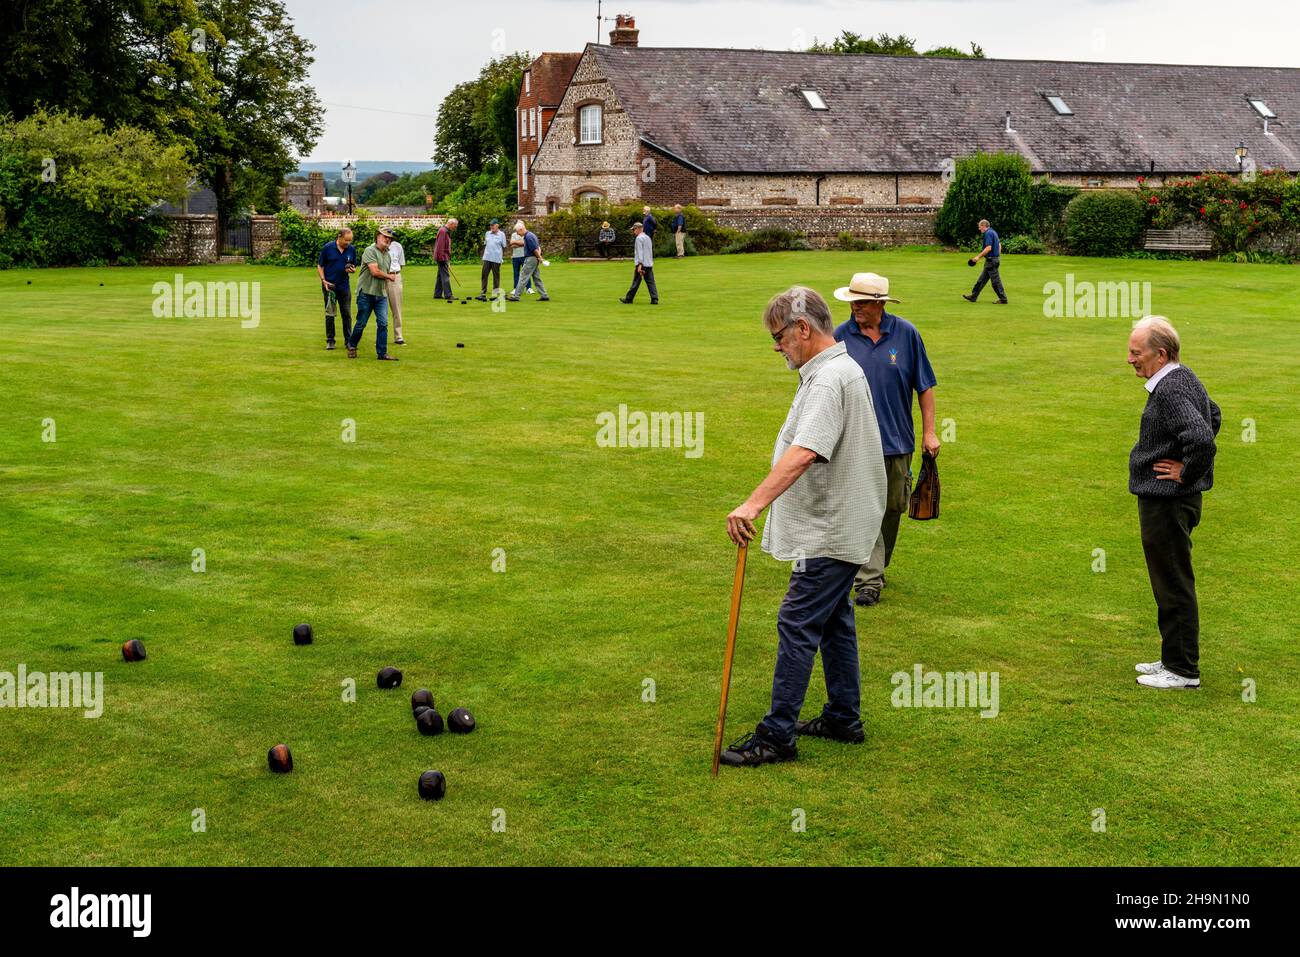 Every Saturday Groups Of Local Men Play A Form Of Bowls Similar To That Played In The 16th Century On The Castle Bowling Green, Lewes, East Sussex, UK Stock Photo